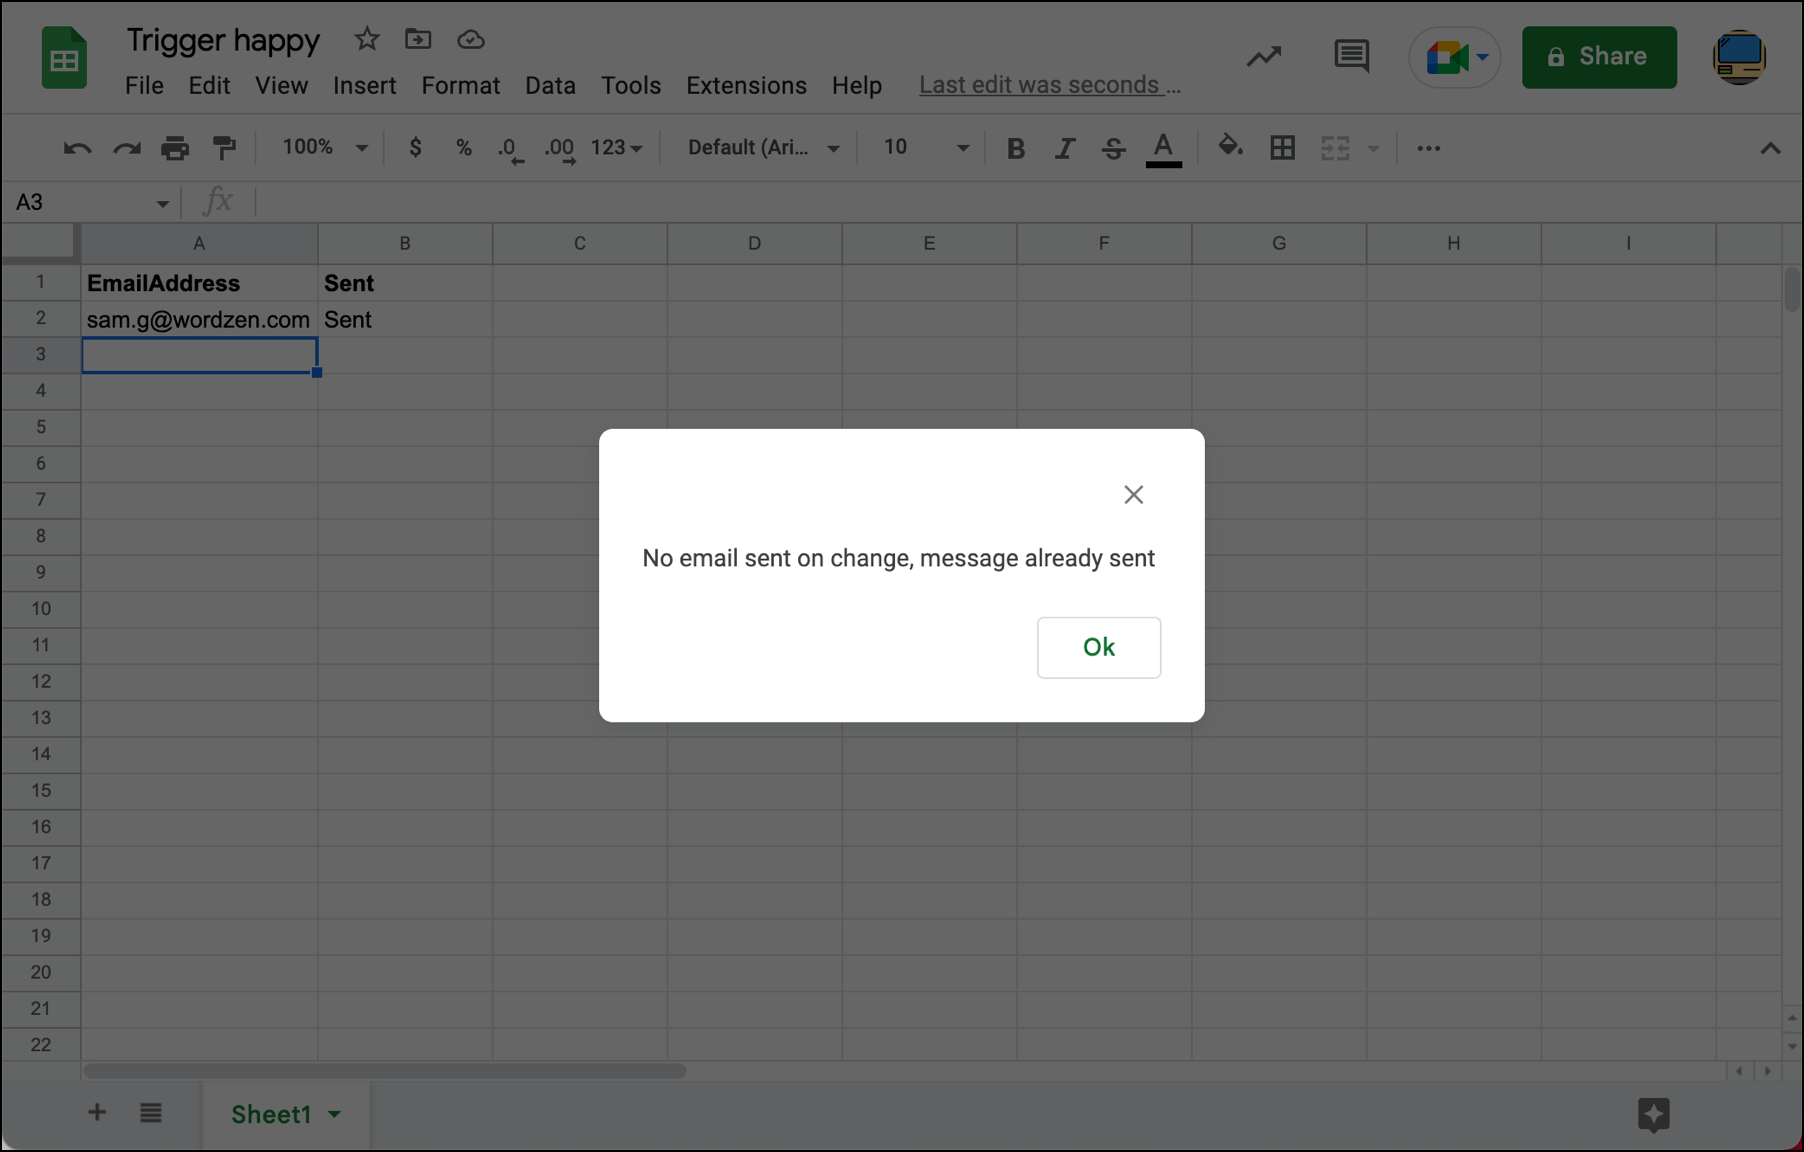 The script won't send multiple emails to one person